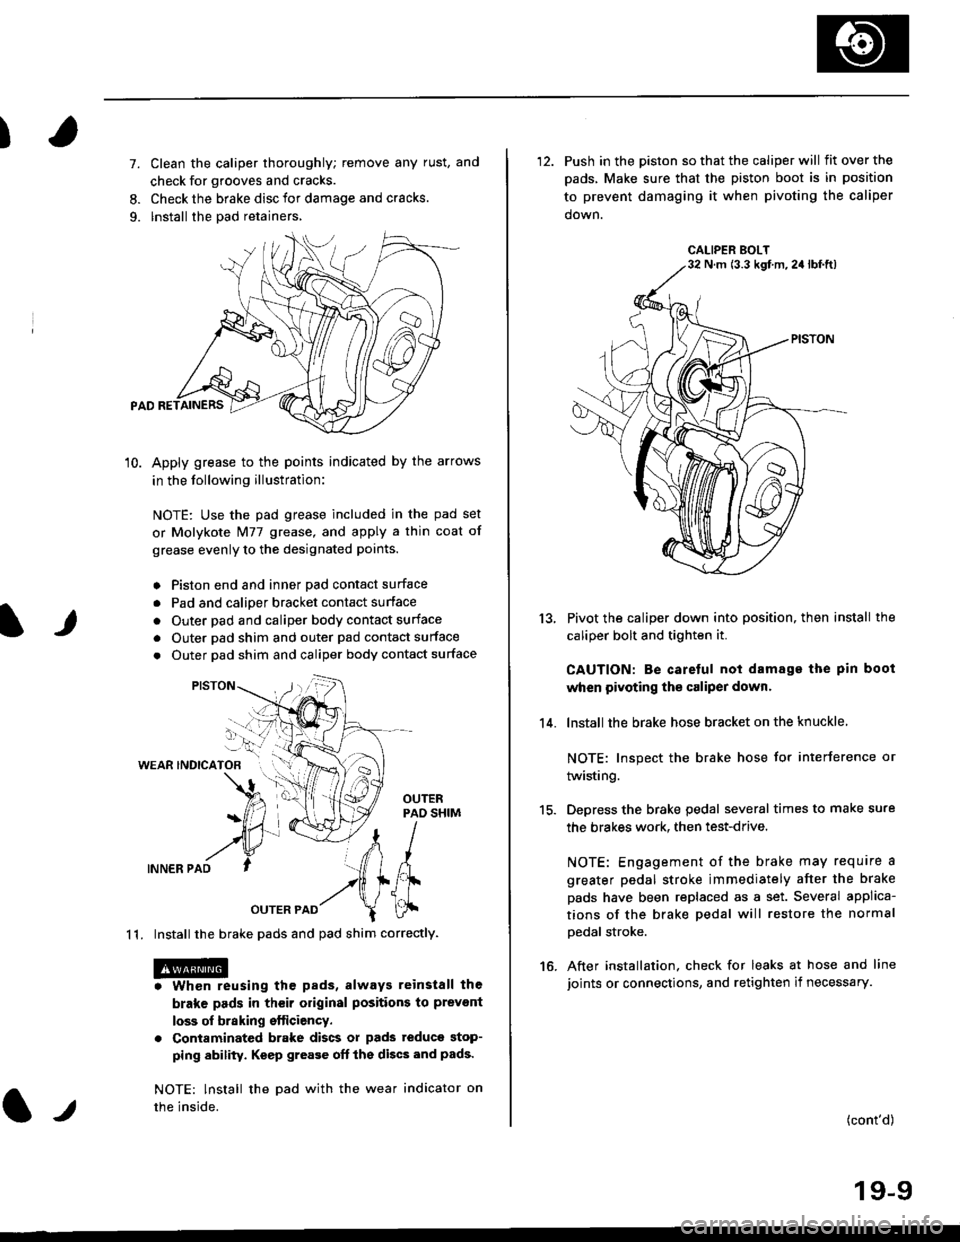 HONDA CIVIC 1999 6.G Workshop Manual )
It
7. Clean the caliper thoroughly; remove any rust, and
check for grooves and cracks.
8. Check the brake disc for damage and cracks.
9. lnstall the pad retainers,
10. Apply grease to the points ind